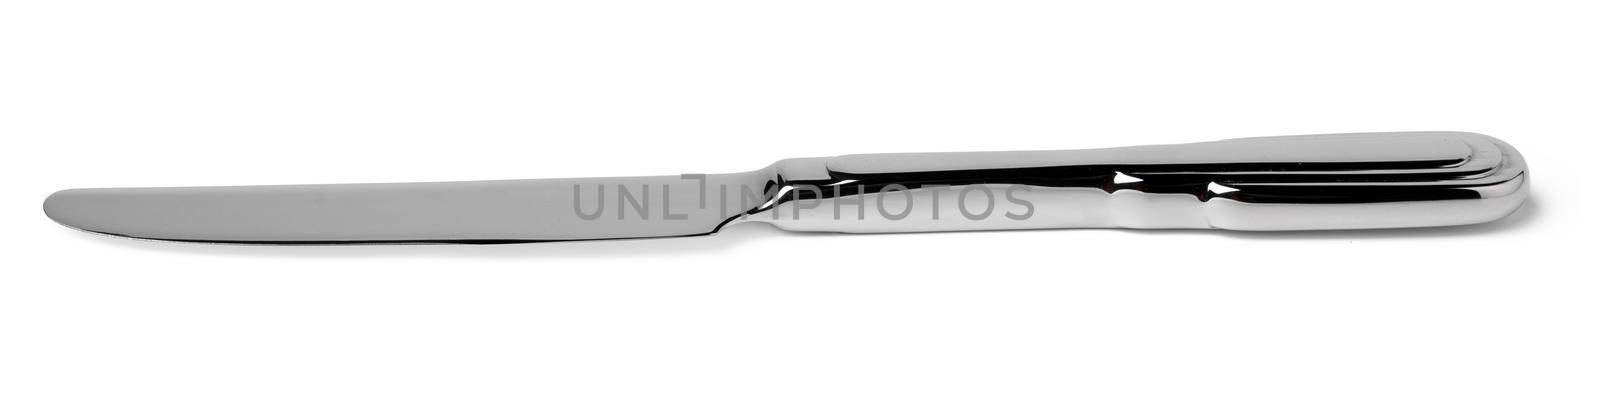 Steel metal knife isolated on white background by Fabrikasimf